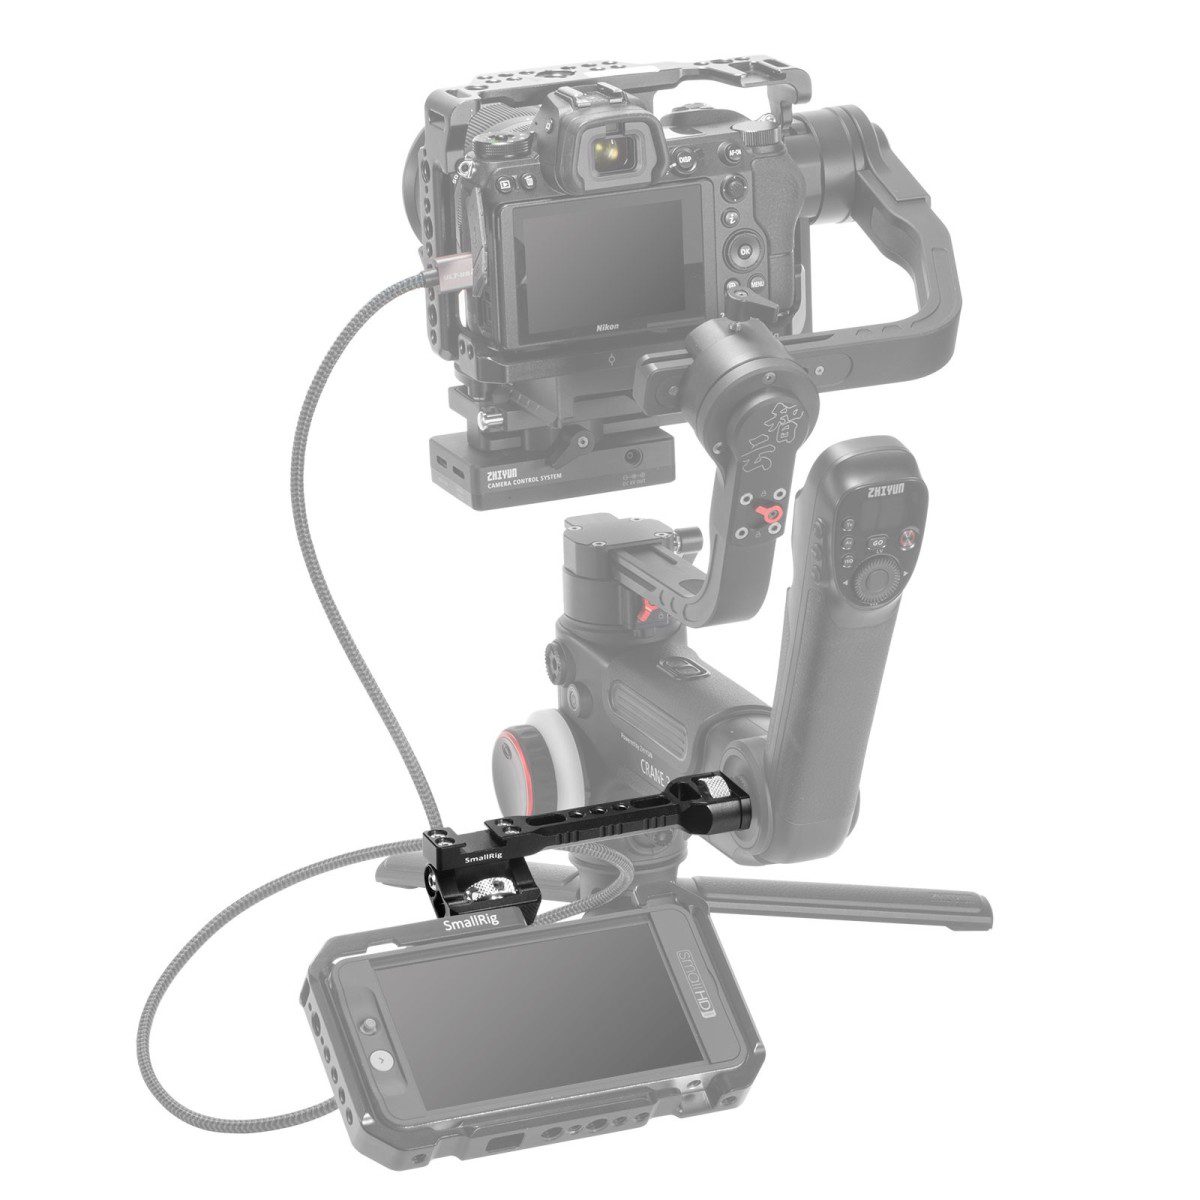 SmallRig Adjustable Monitor Support for Selected DJI and Zhiyun Stabilizers BSE2386B